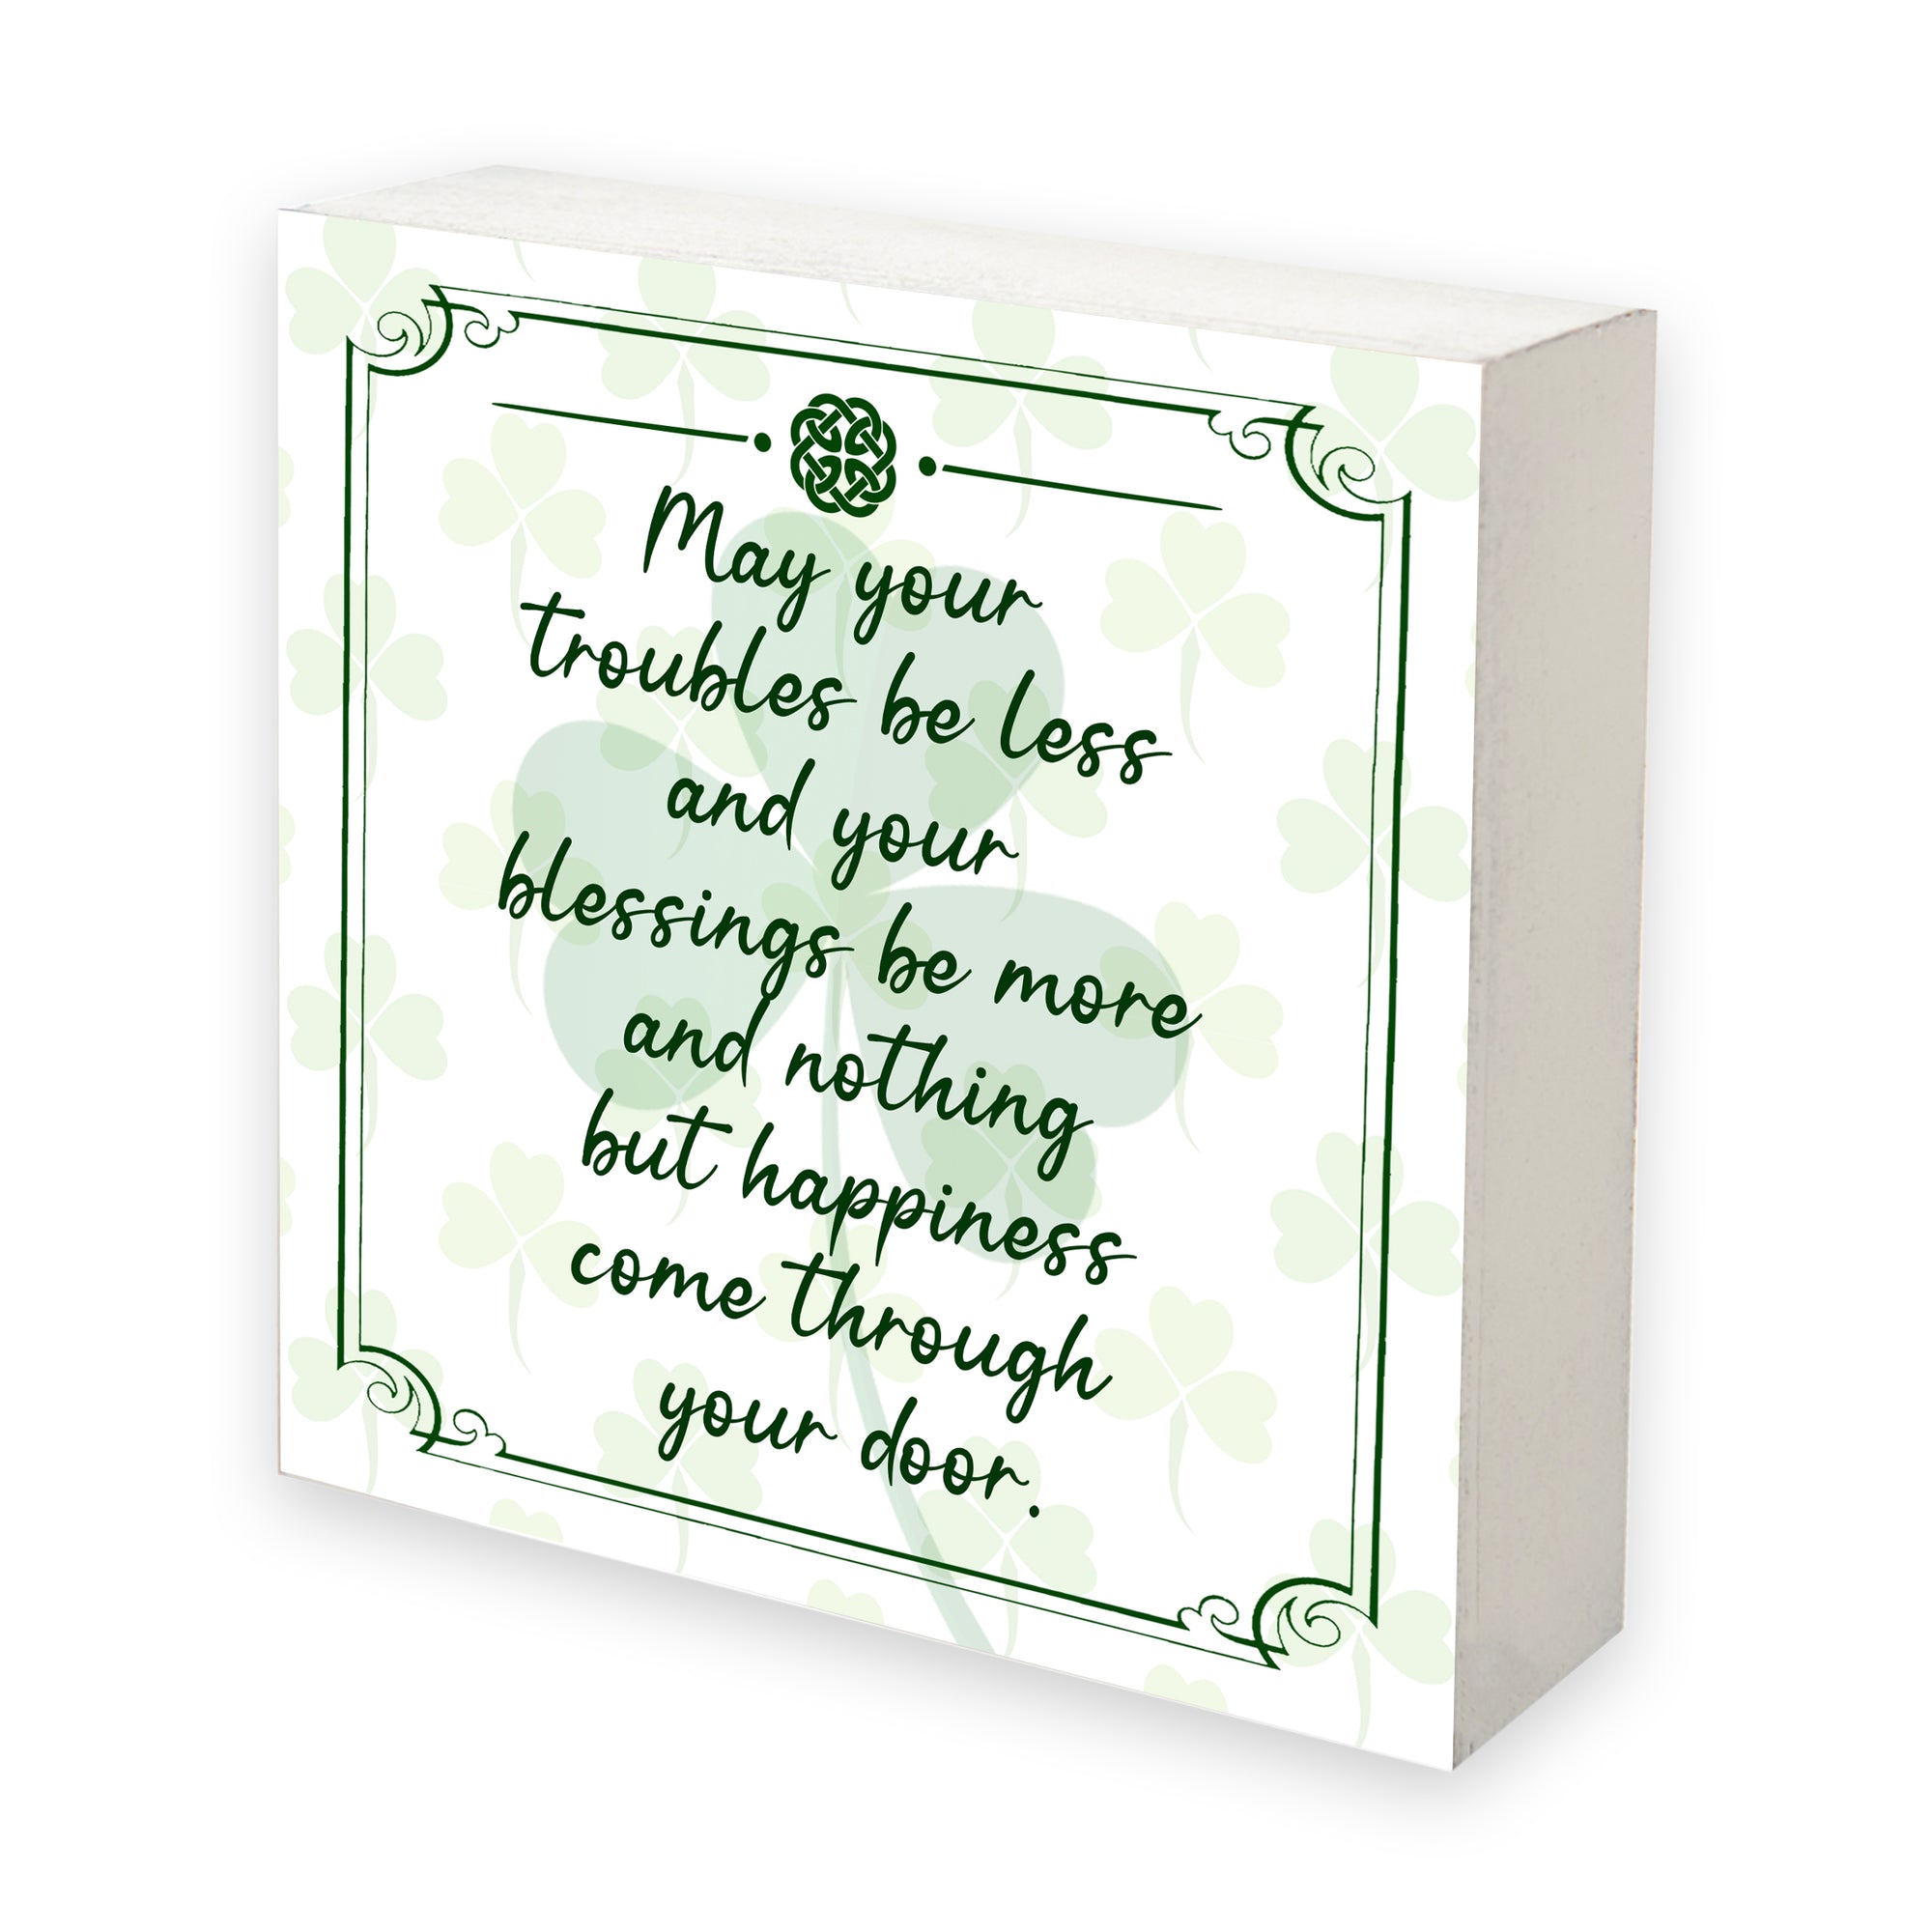 St. Patrick's Day Irish Everyday Shadow Box 6x6 - May Your Trouble Be Less